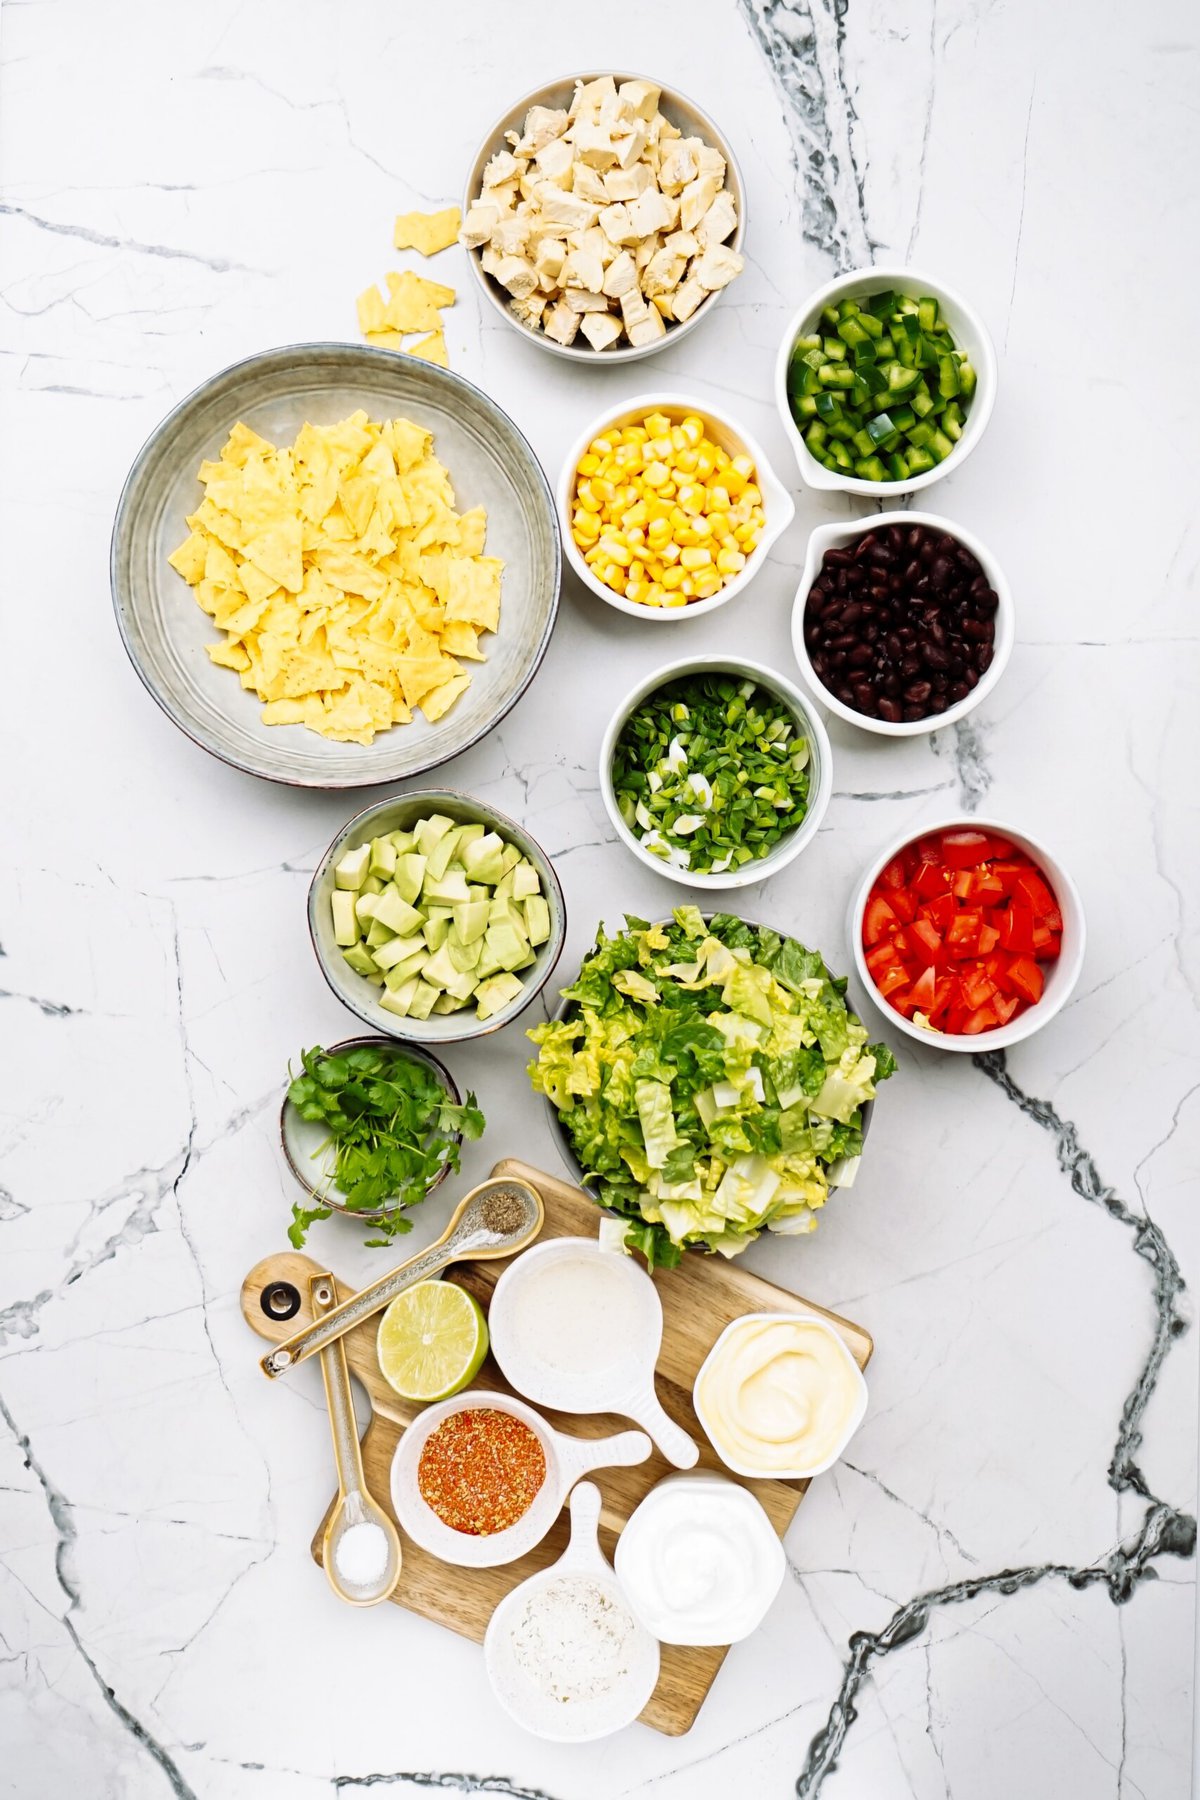 Various ingredients for a southwest salad arranged neatly on a marble countertop.